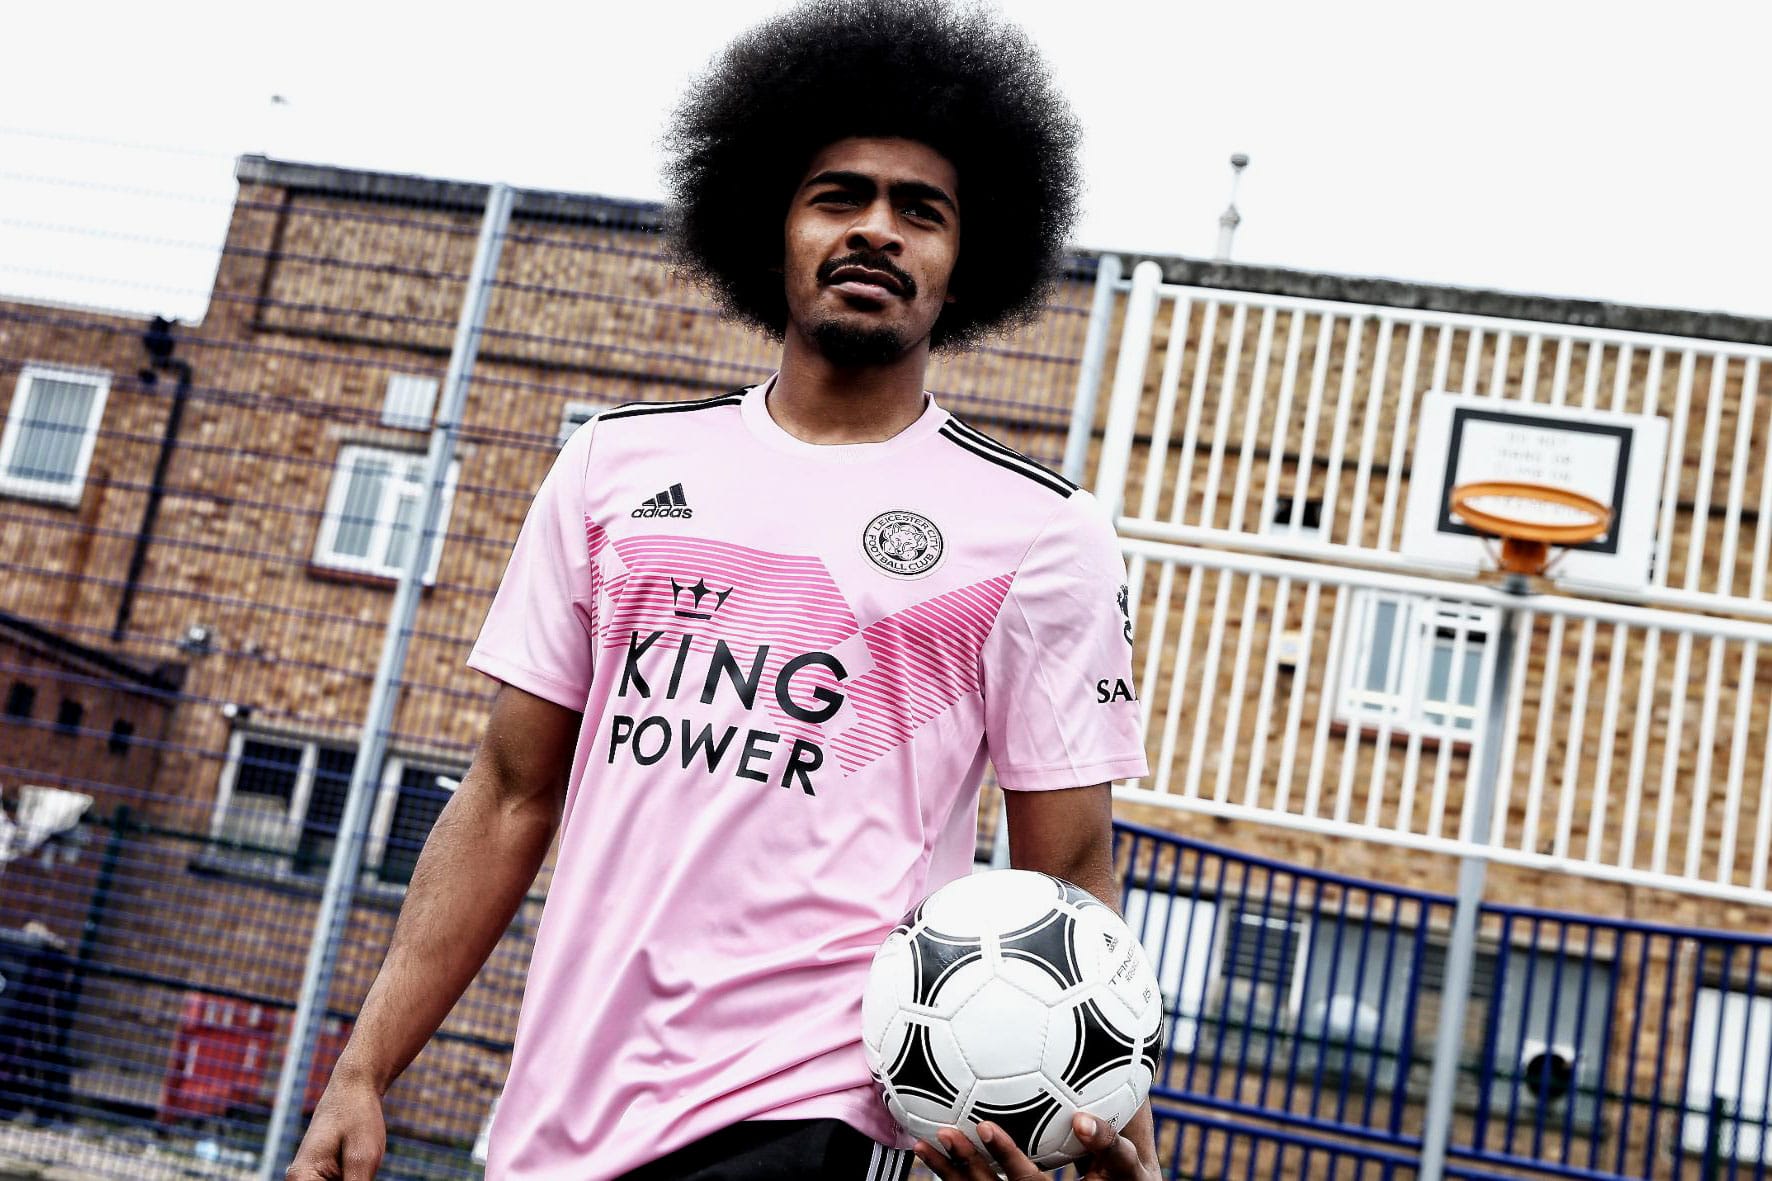 The 10 Best Football Kits of the 2019 